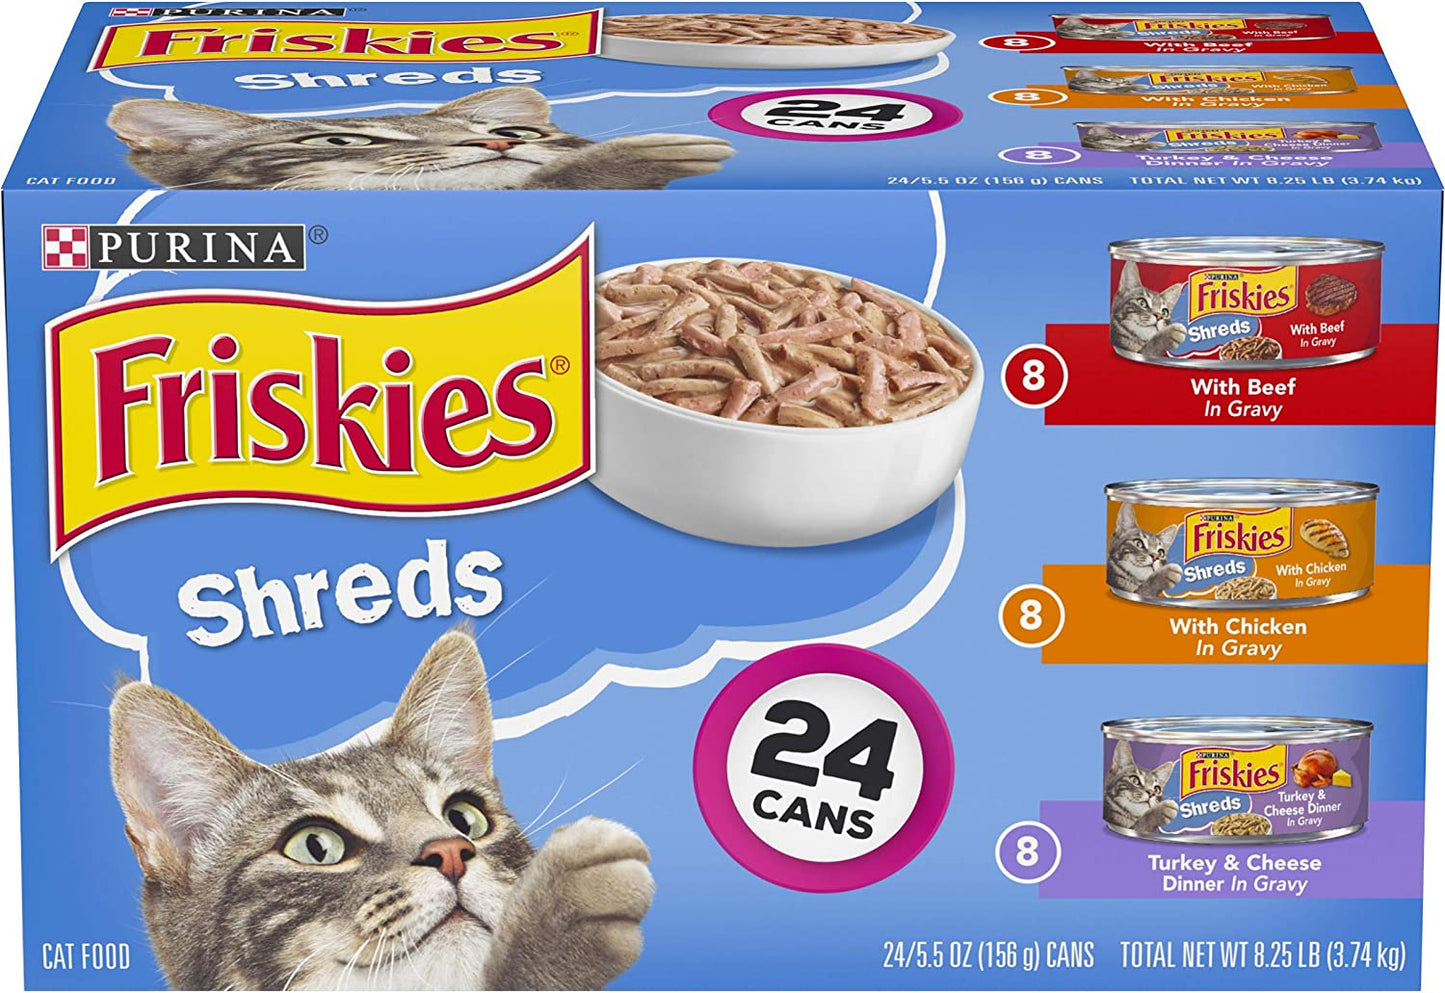 Purina Friskies Gravy Wet Cat Food Variety Pack, Shreds Beef, Chicken And Turkey & Cheese Dinner - (24) 5.5 Oz. Cans